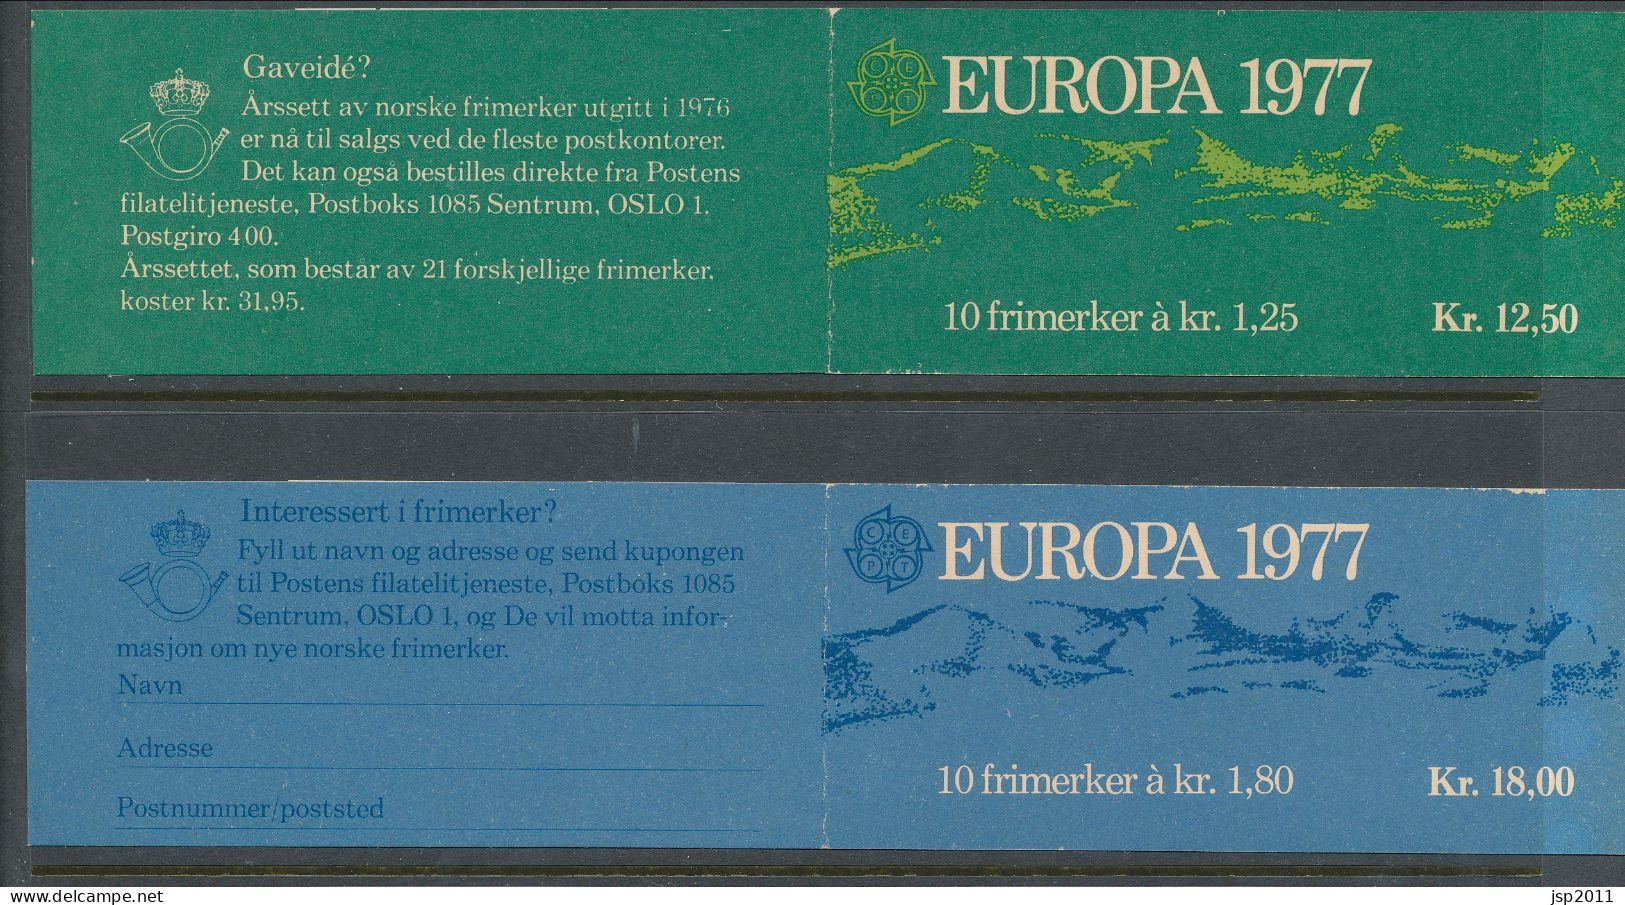 Norway, 1977. Set Of 2 Booklets, Facit # H45 And H46 - Europe XI, Landskapes MNH (**). See Description - Libretti